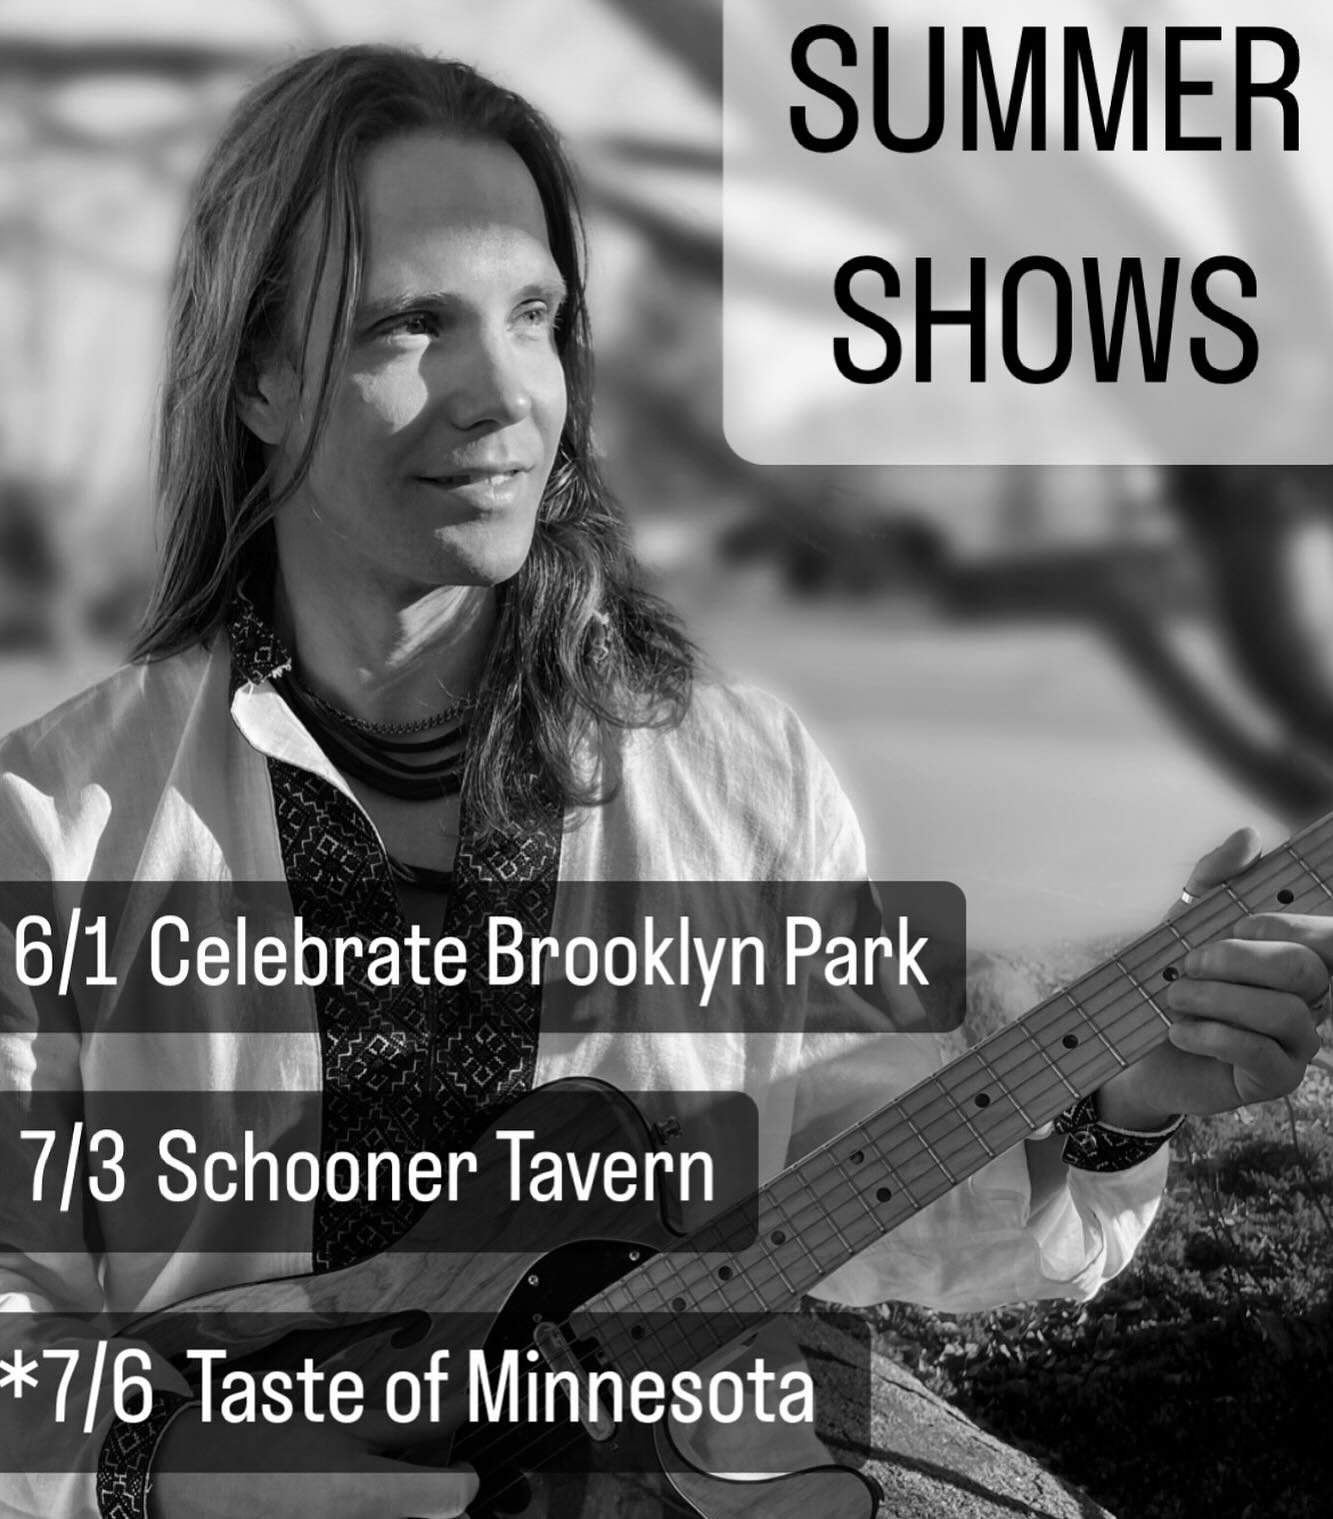 Summer shows! ☀️

More details to come as we near the show dates